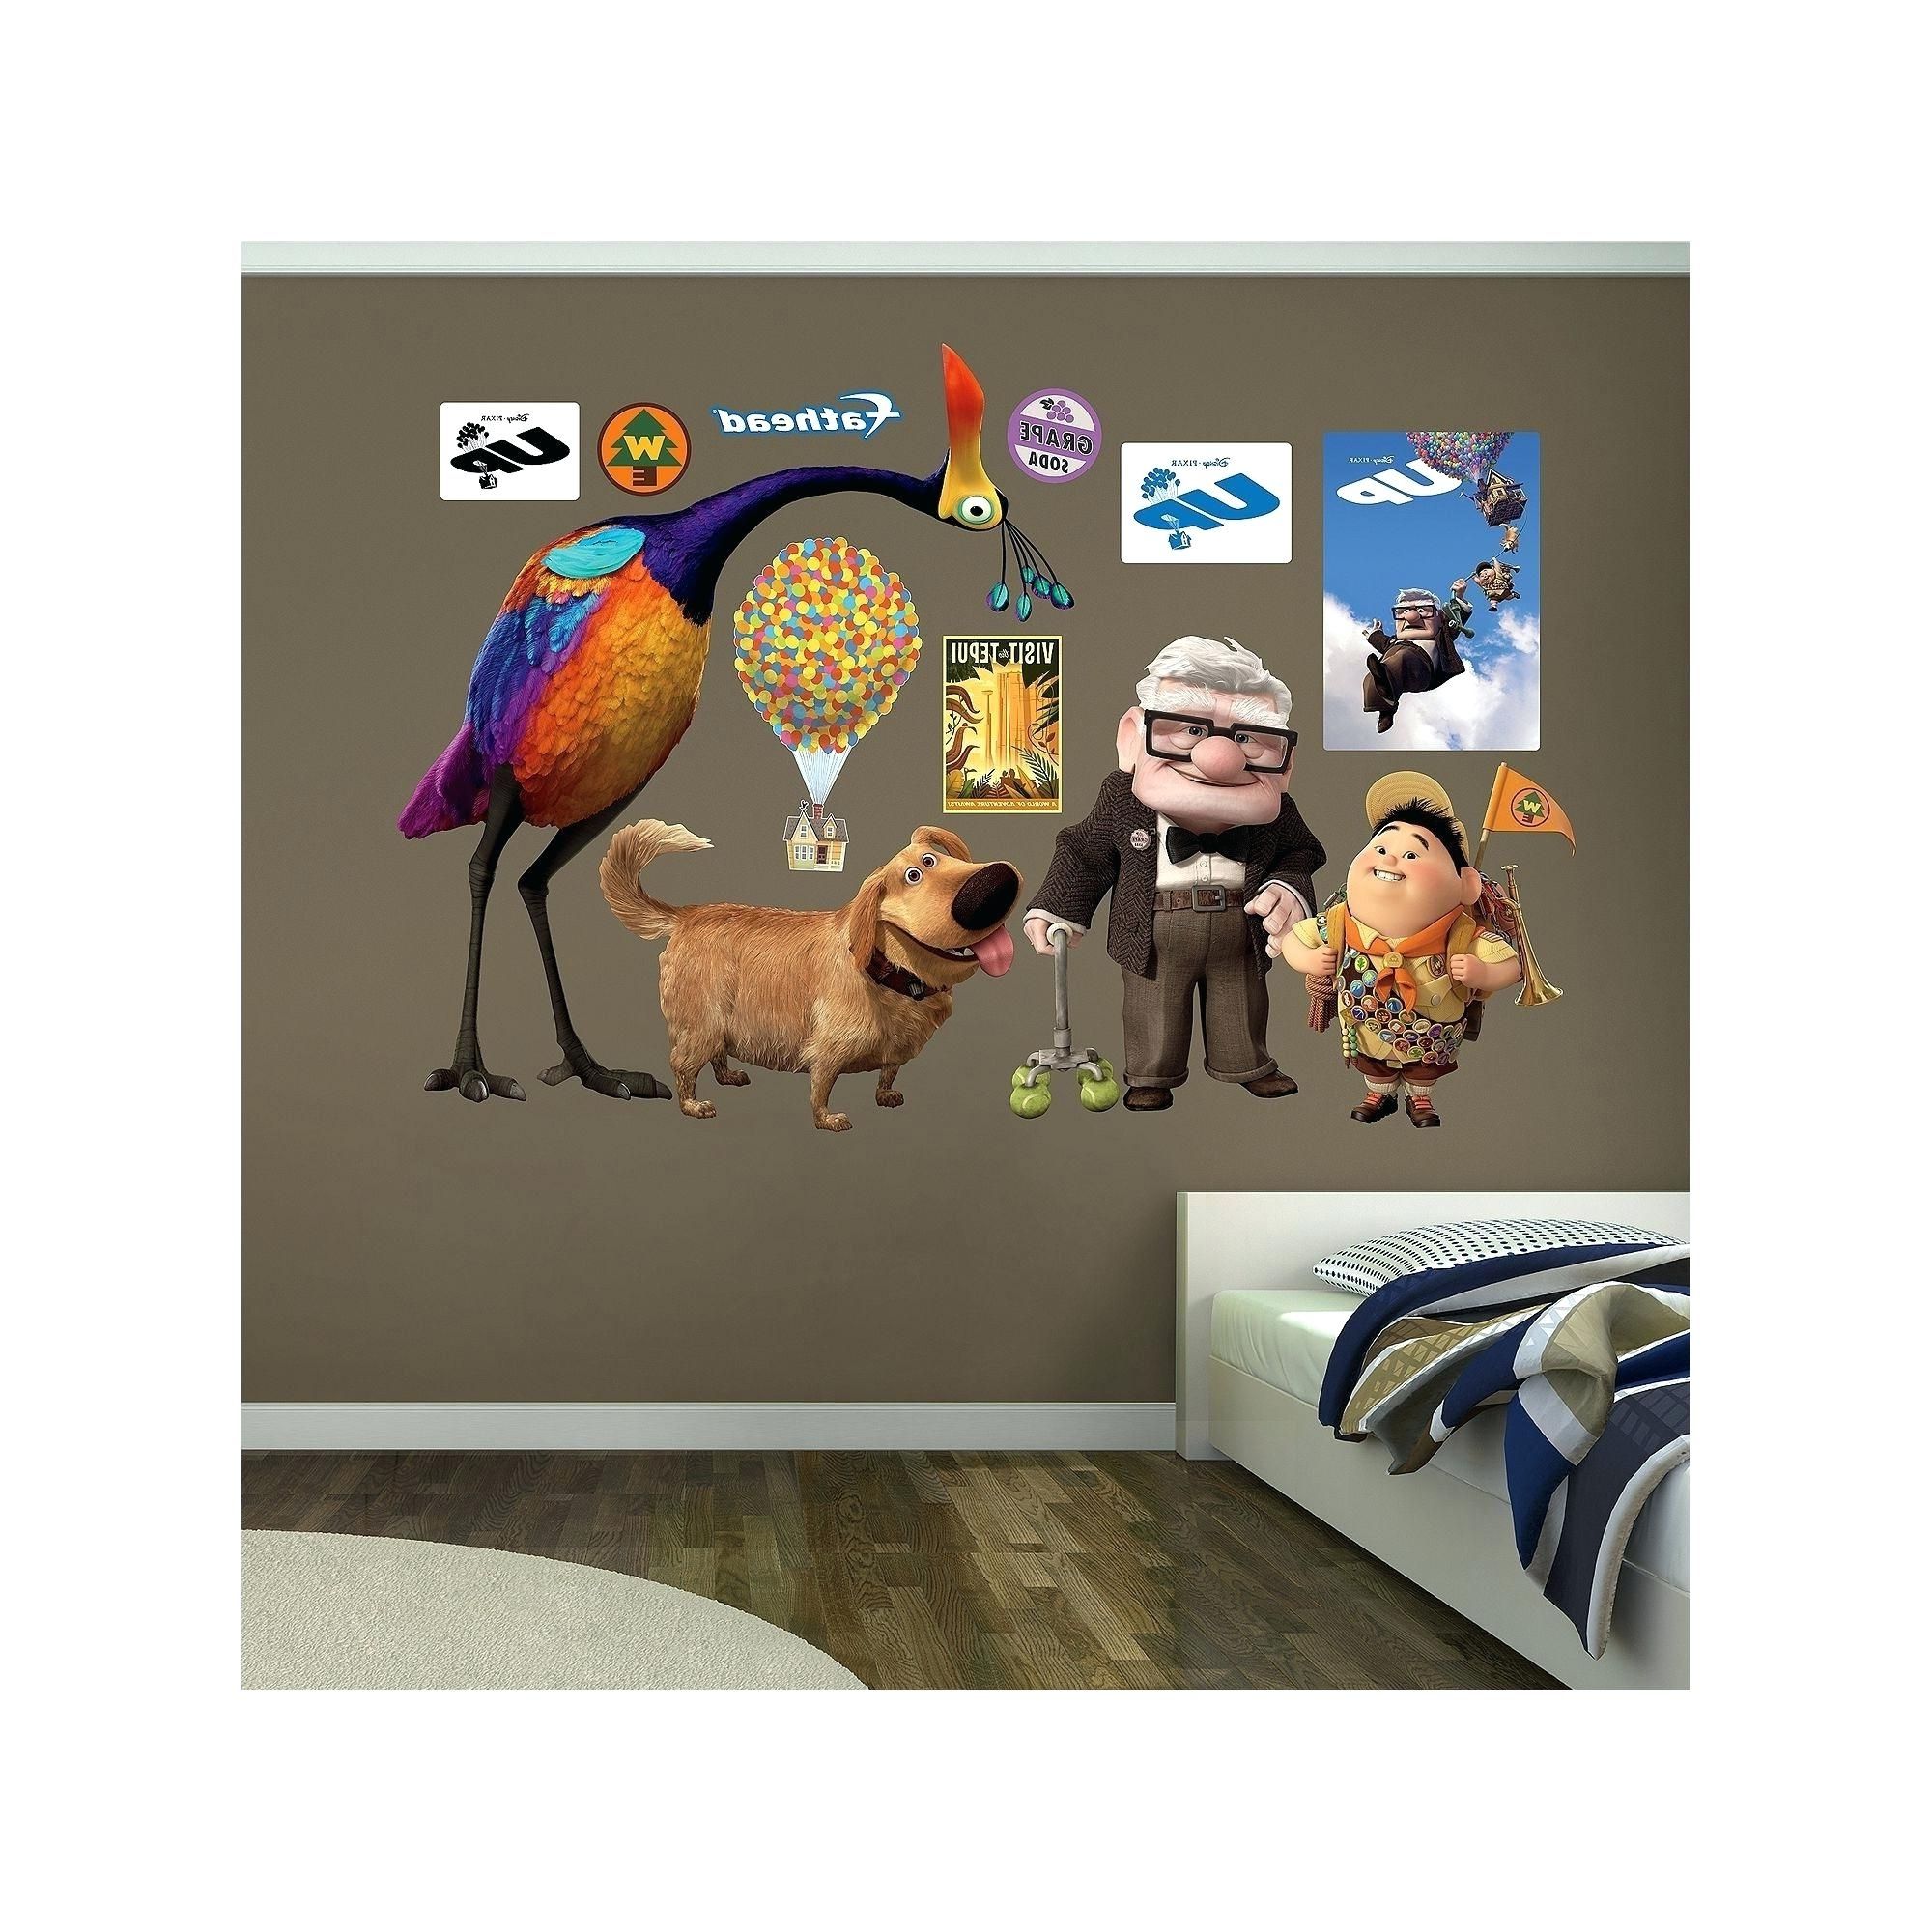 Popular Pixar Wall Decals Toy Story Wall Stickers Toy Story Smashed Wall Throughout Toy Story Wall Art (View 10 of 15)